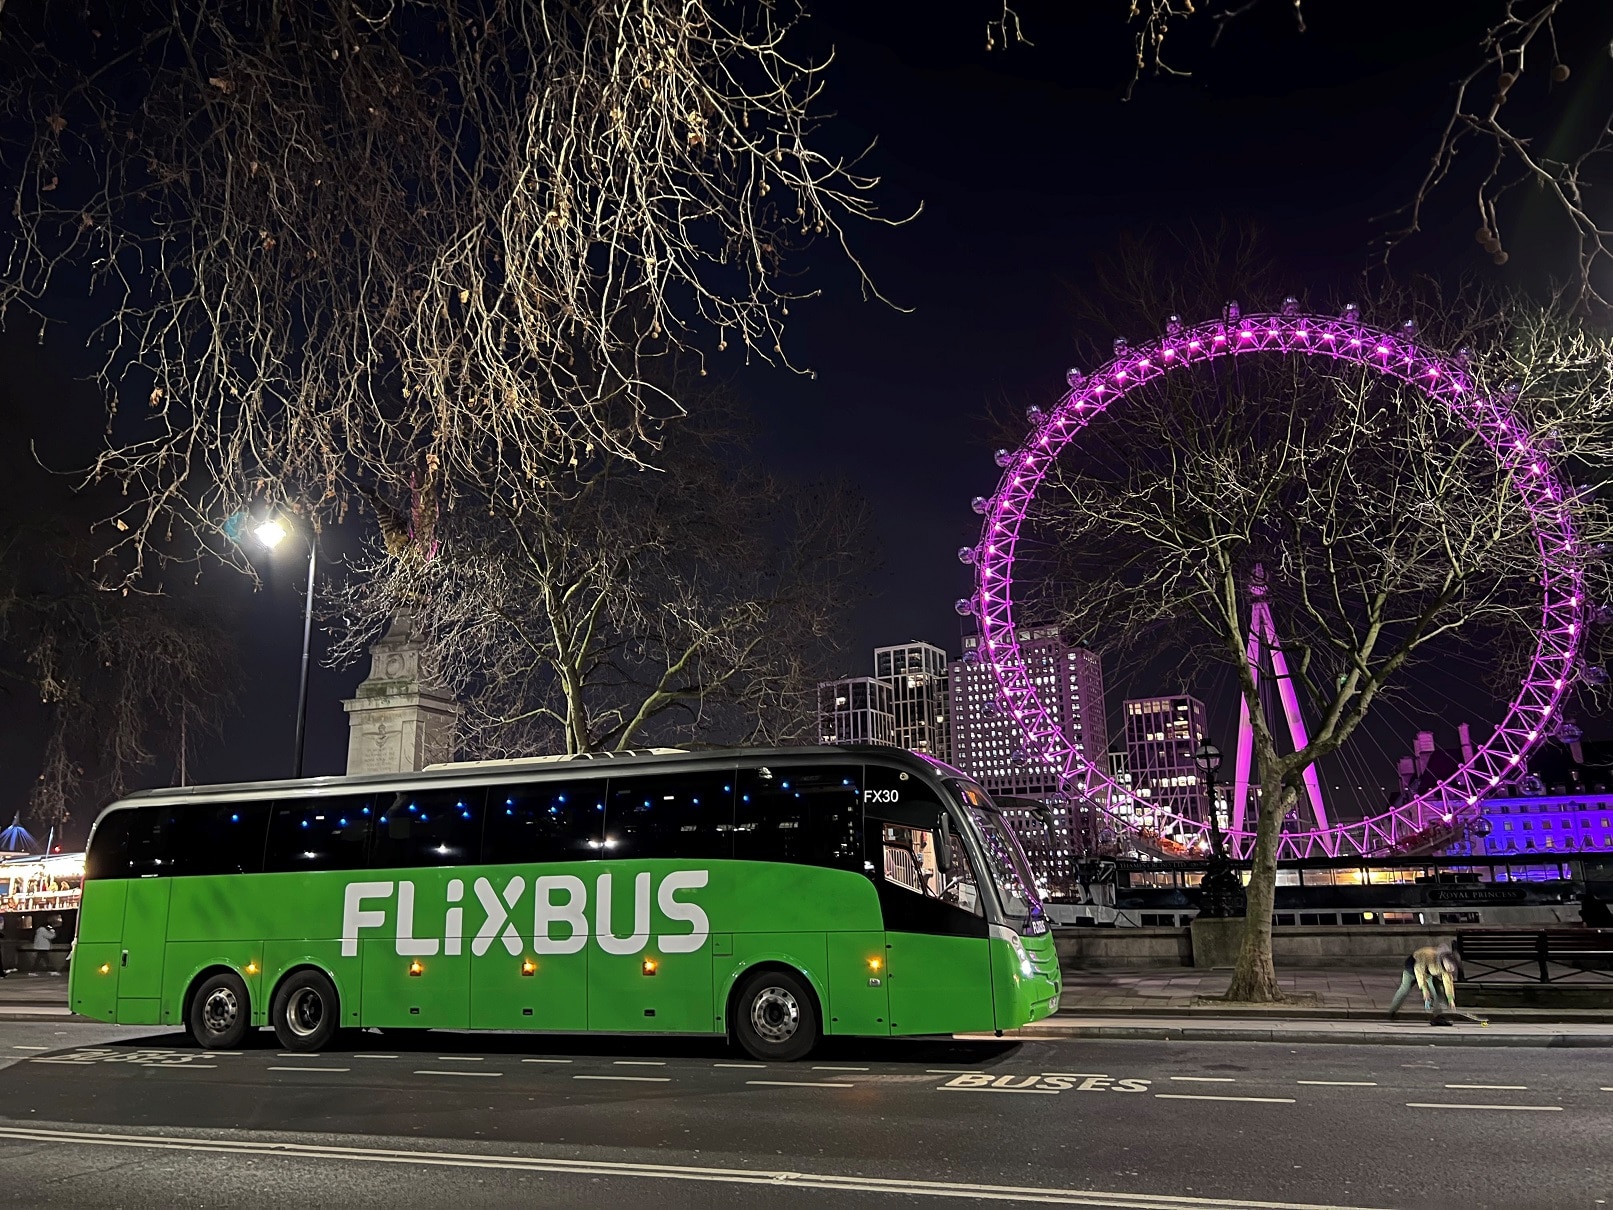 FlixBus UK growth ahead of target, firm says